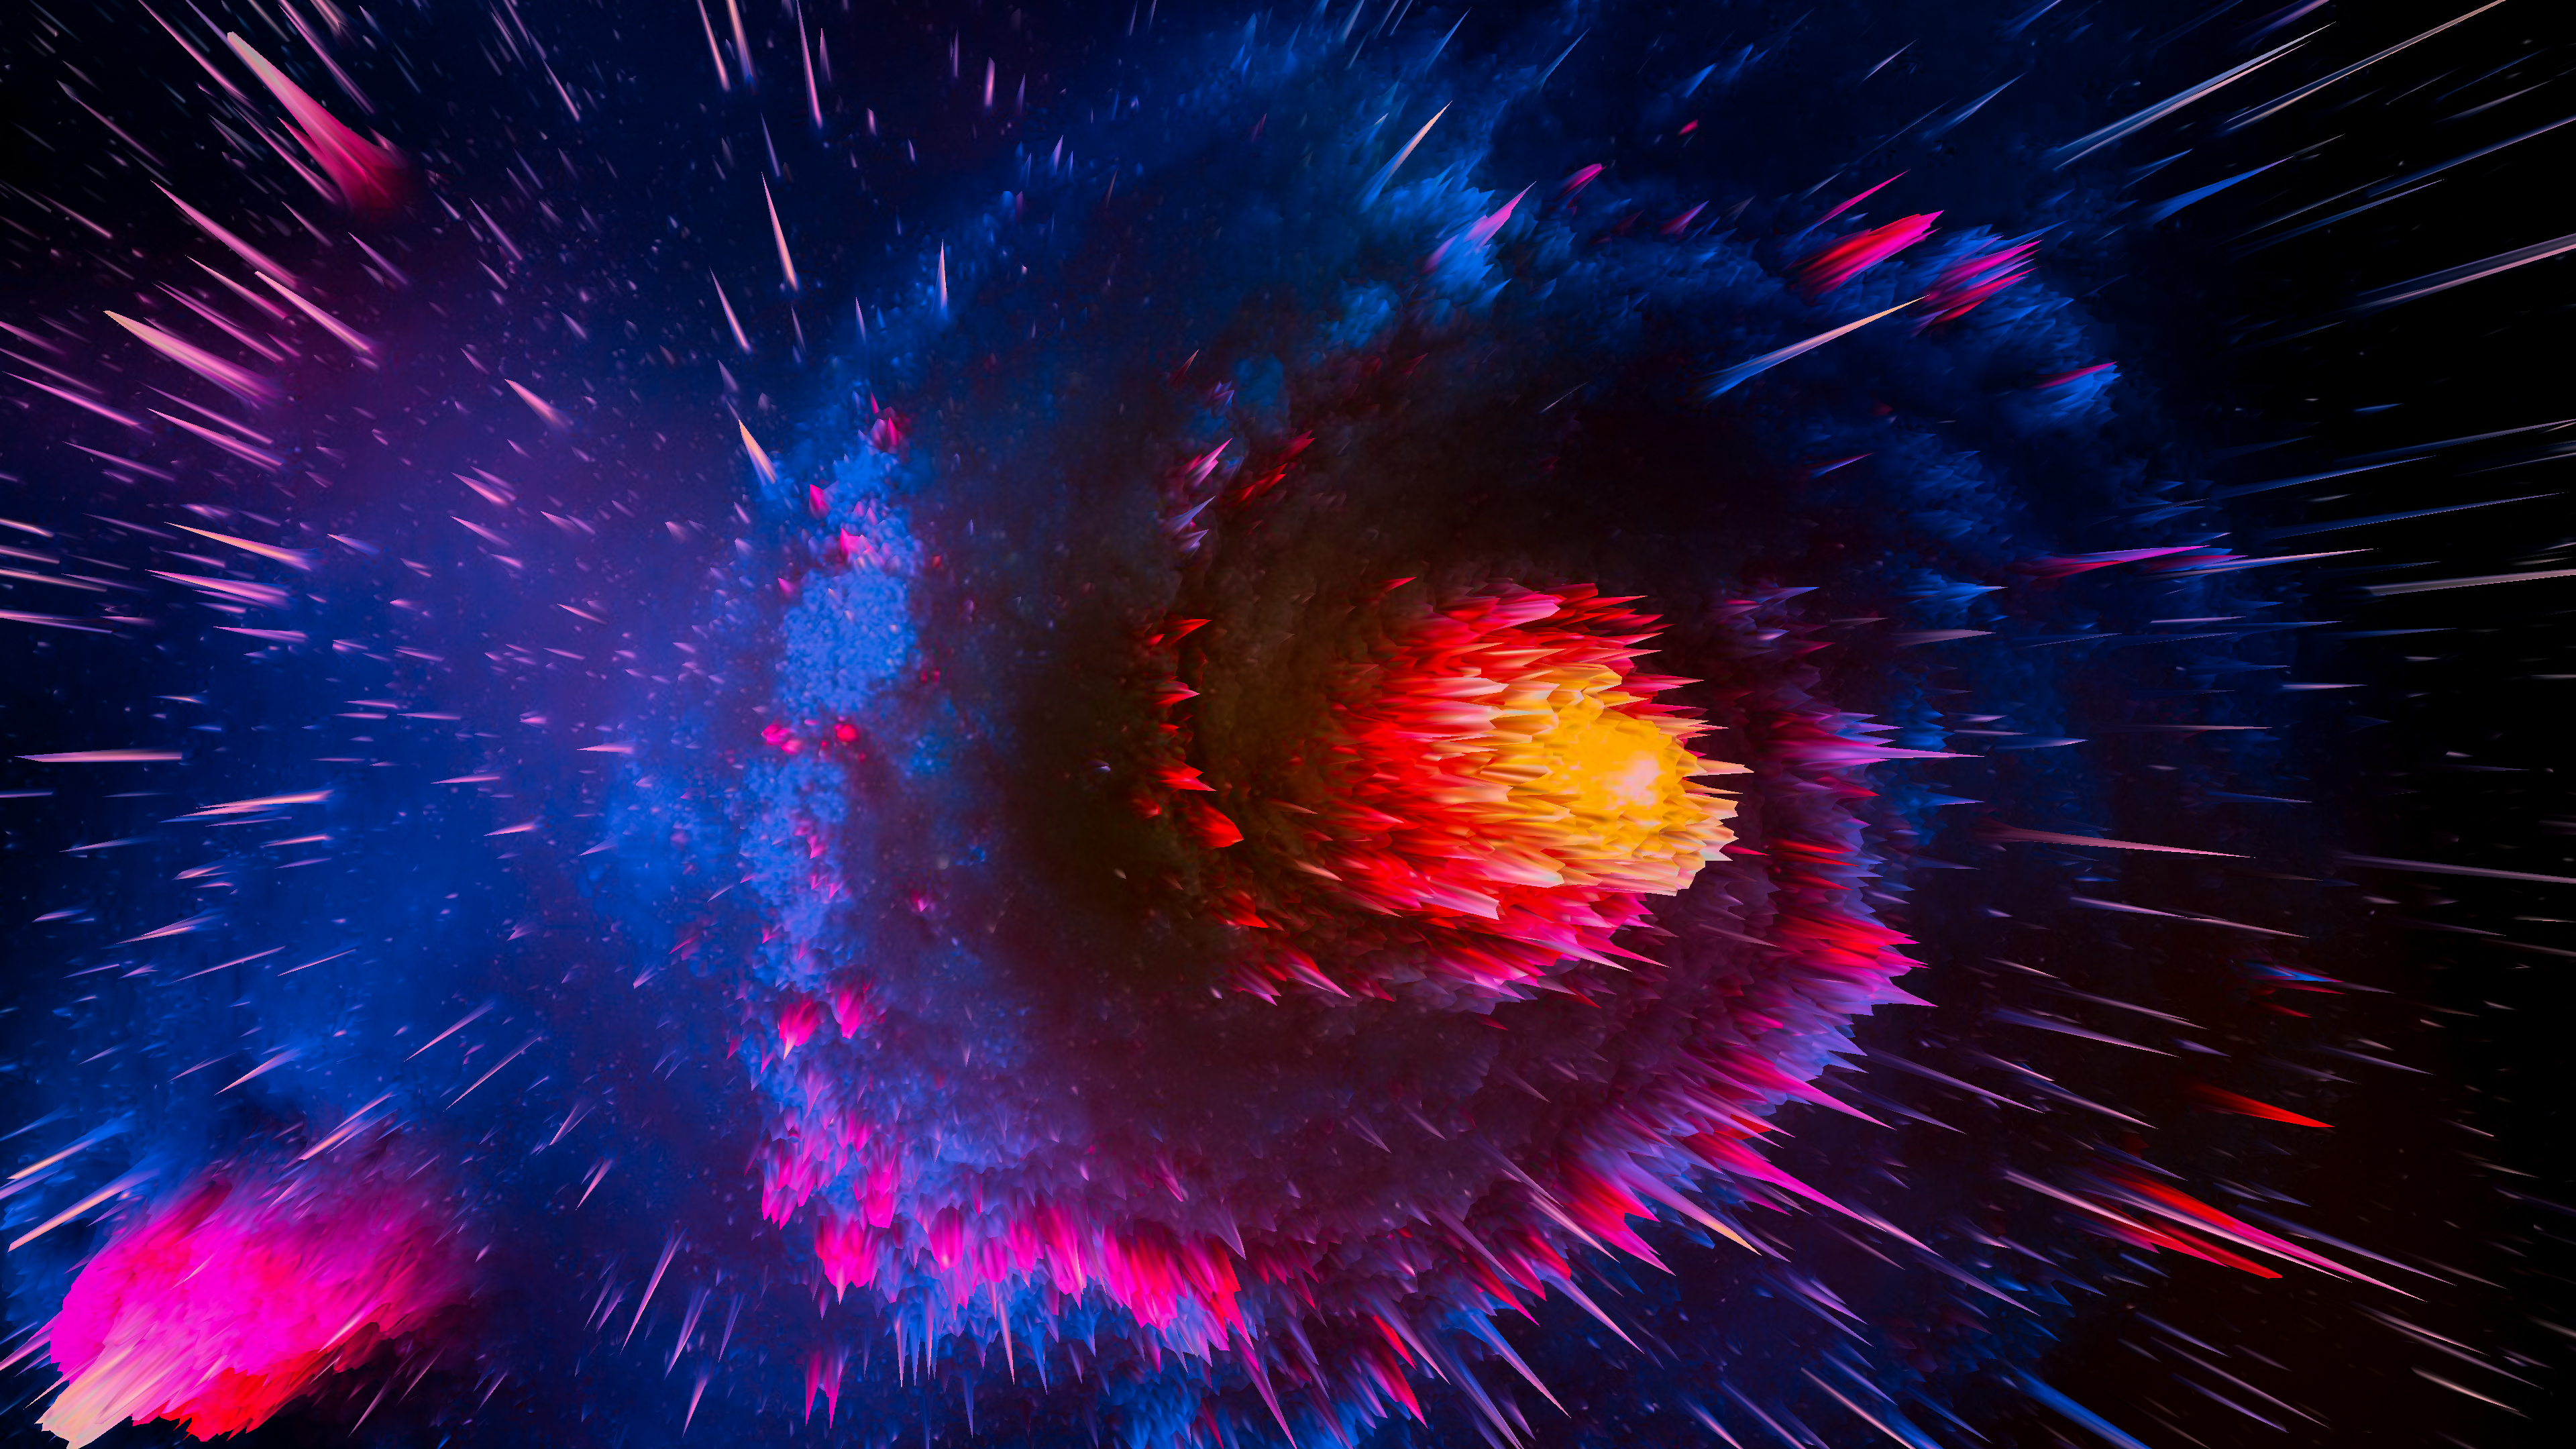 Download wallpaper 1920x1080 space planets takeoff explosion hd  background